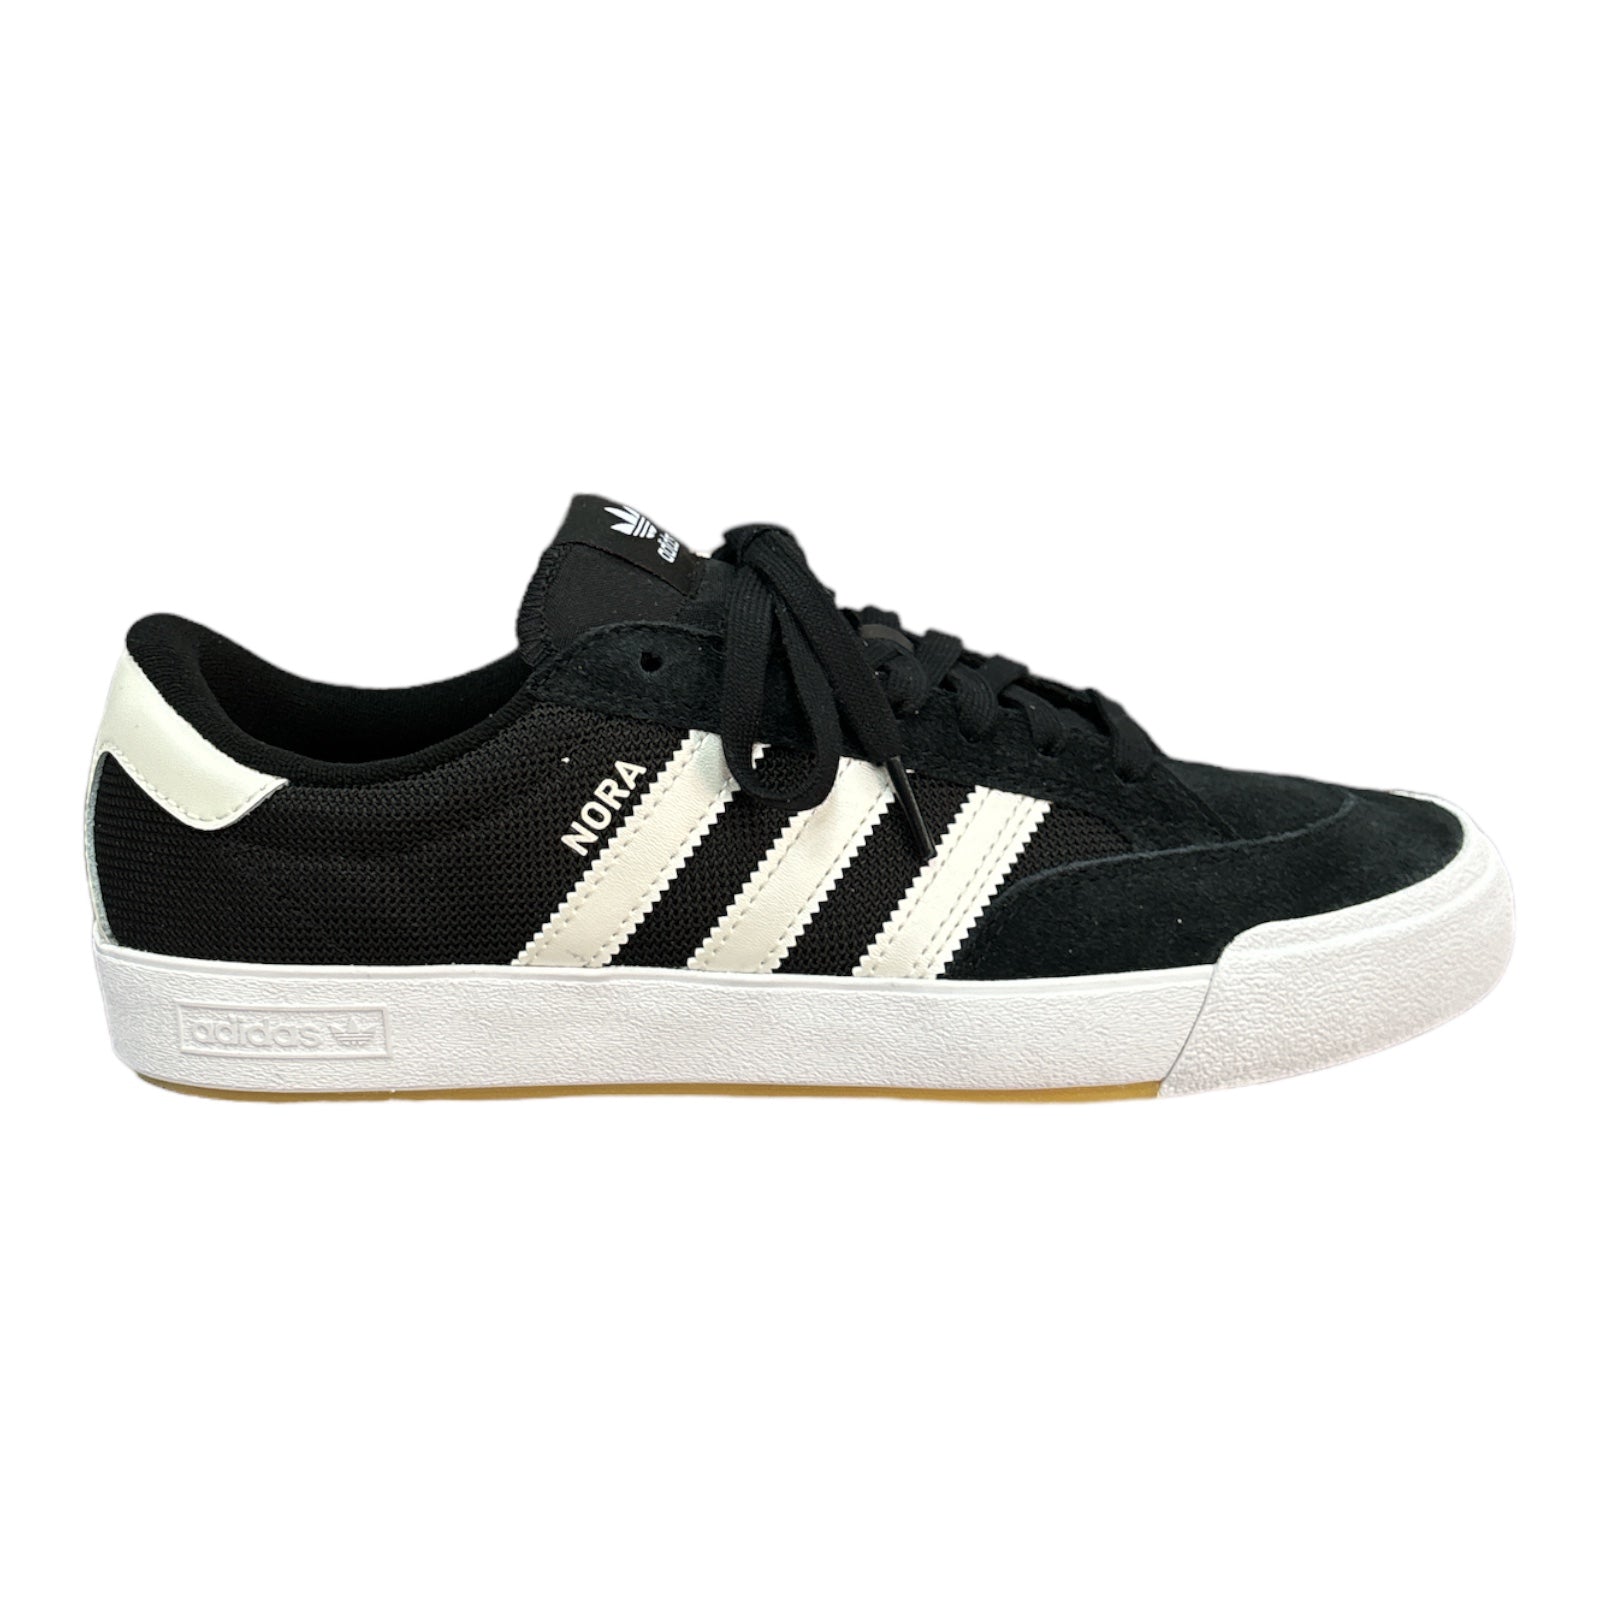 Adidas Nora In Black Suede with White Outsole and White Stripes. 